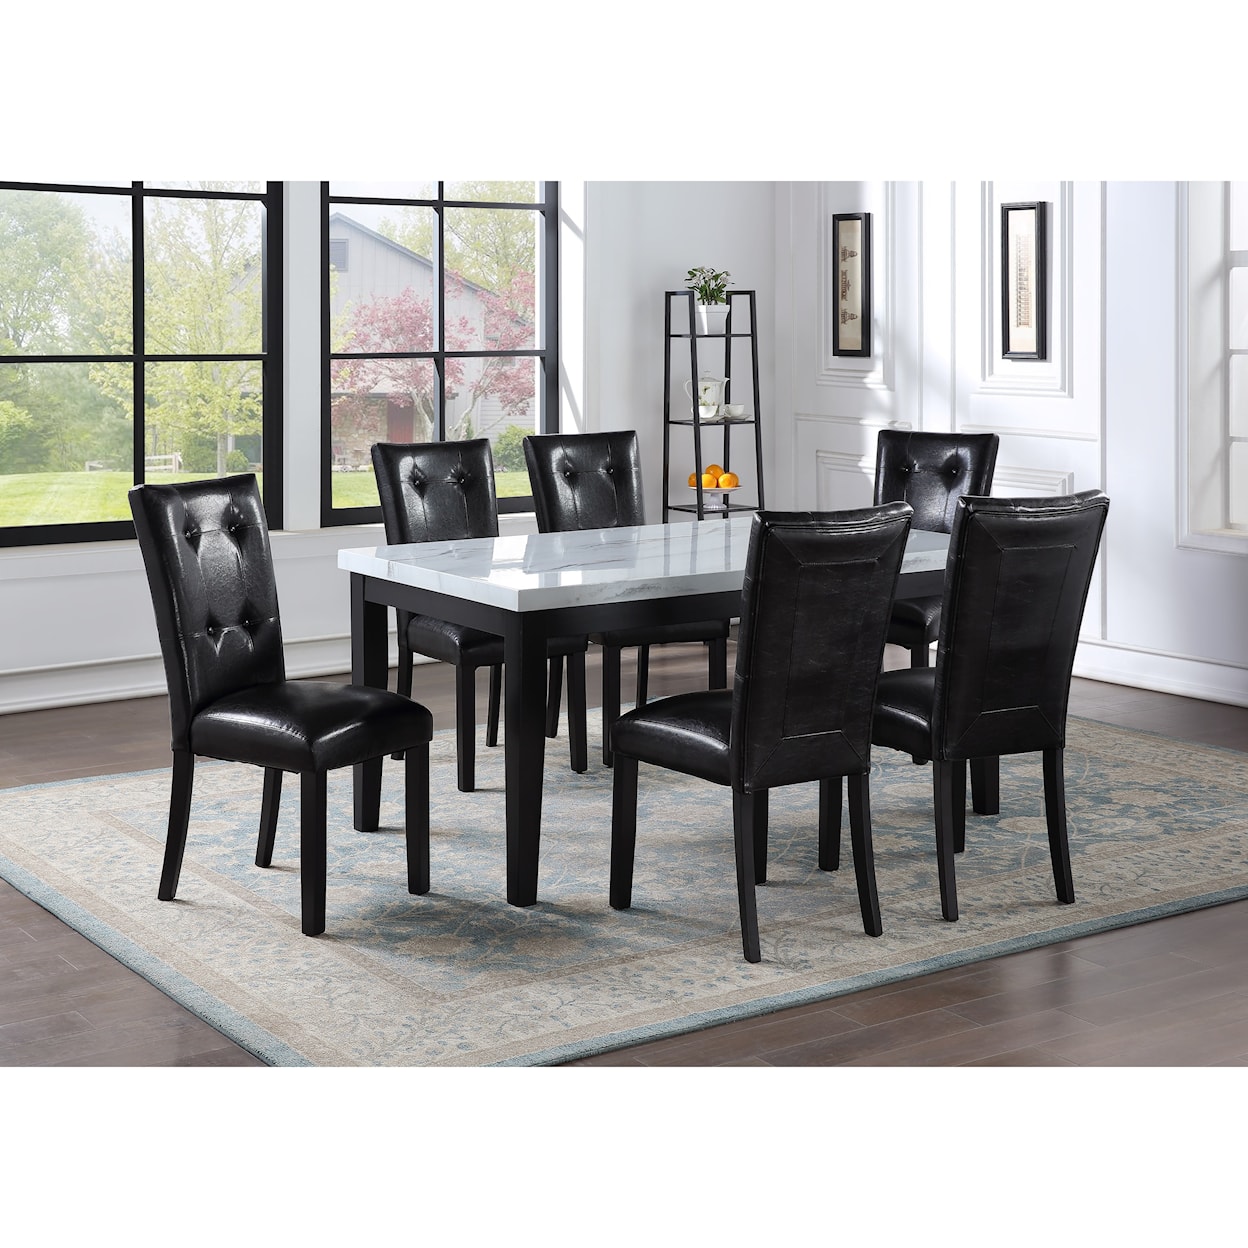 Steve Silver Sterling 7-Piece Table and Chair Set